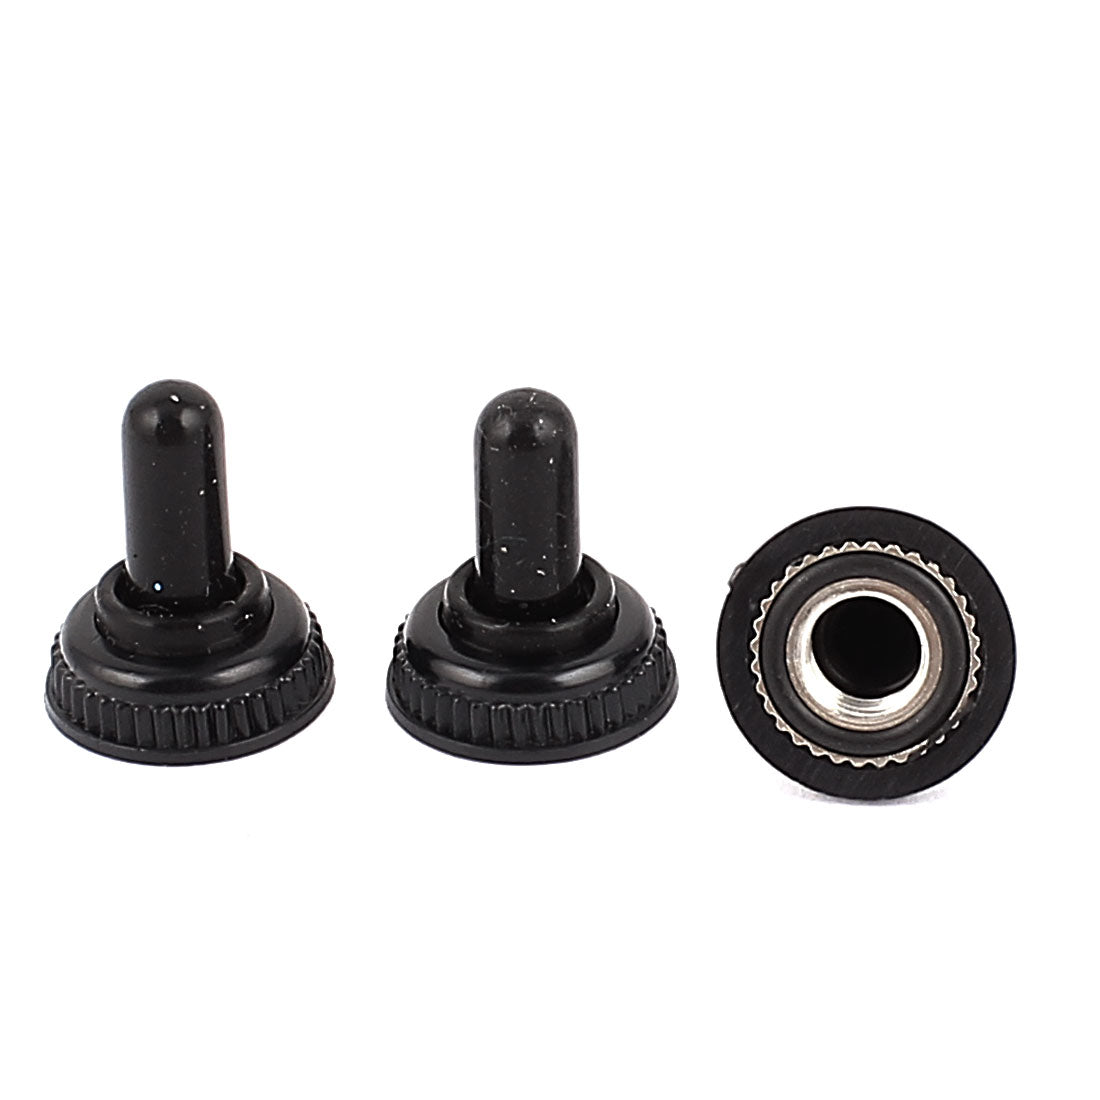 uxcell Uxcell 3Pcs 5mm Dia Resistance Rubber Toggle Switch Waterproof Boot Cover Cap